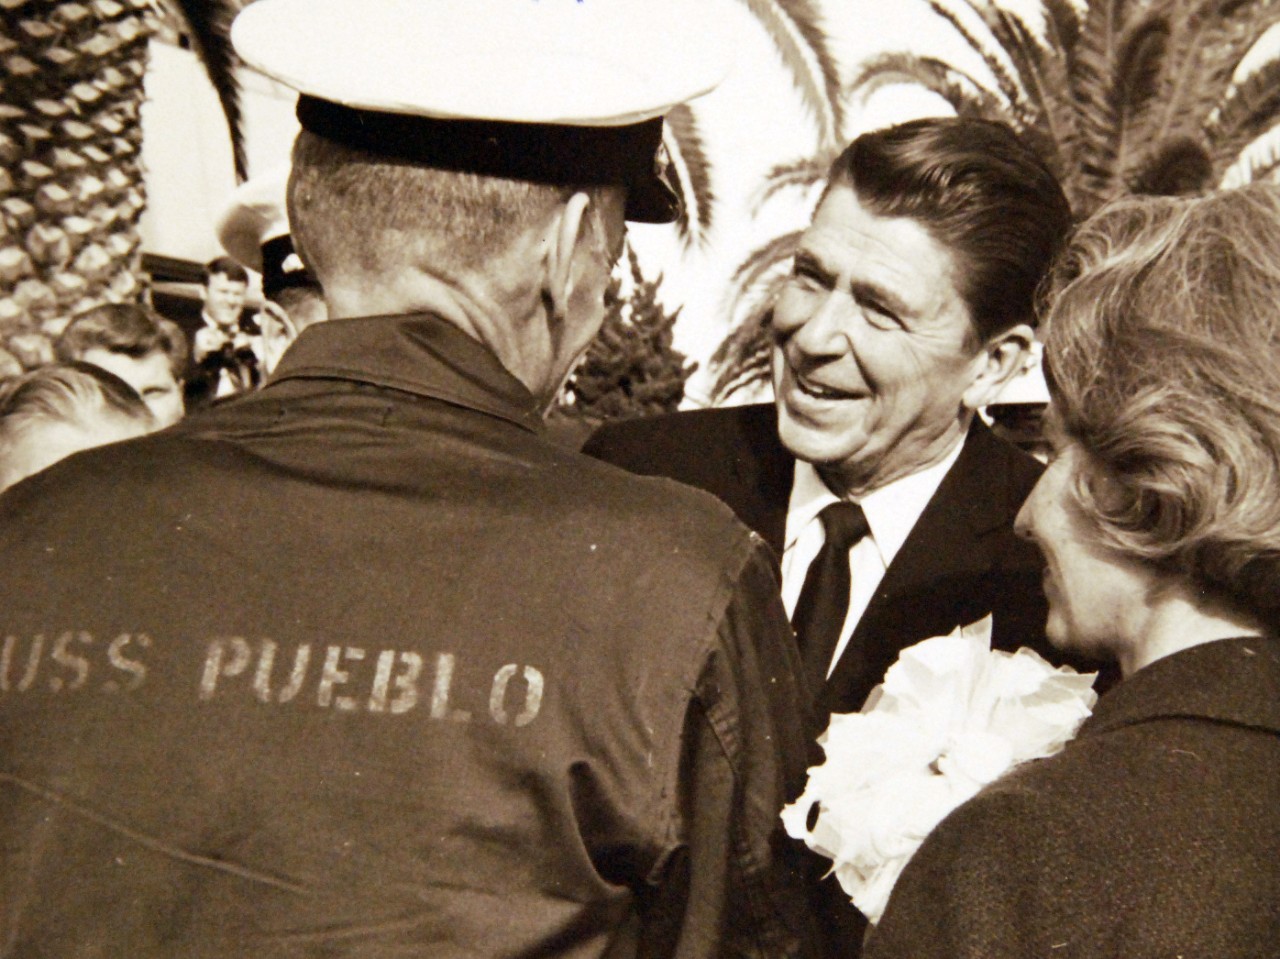 428-GX-USN-1140224:   San Diego, California, December 24, 1968.   Governor Ronald Reagan of California, (center), greets Commander Lloyd M. Bucher, Commanding Officer of USS Pueblo (AGER-2, as Mrs. Bucher looks on at right.  Commander Bucher just arrived at the U.S. Naval Air Station, Miramar, following a flight from the Republic of Korea.     Official U.S. Navy Photograph, now in the collections of the National Archives.  (2017/05/23).  Photographed from reference card.   